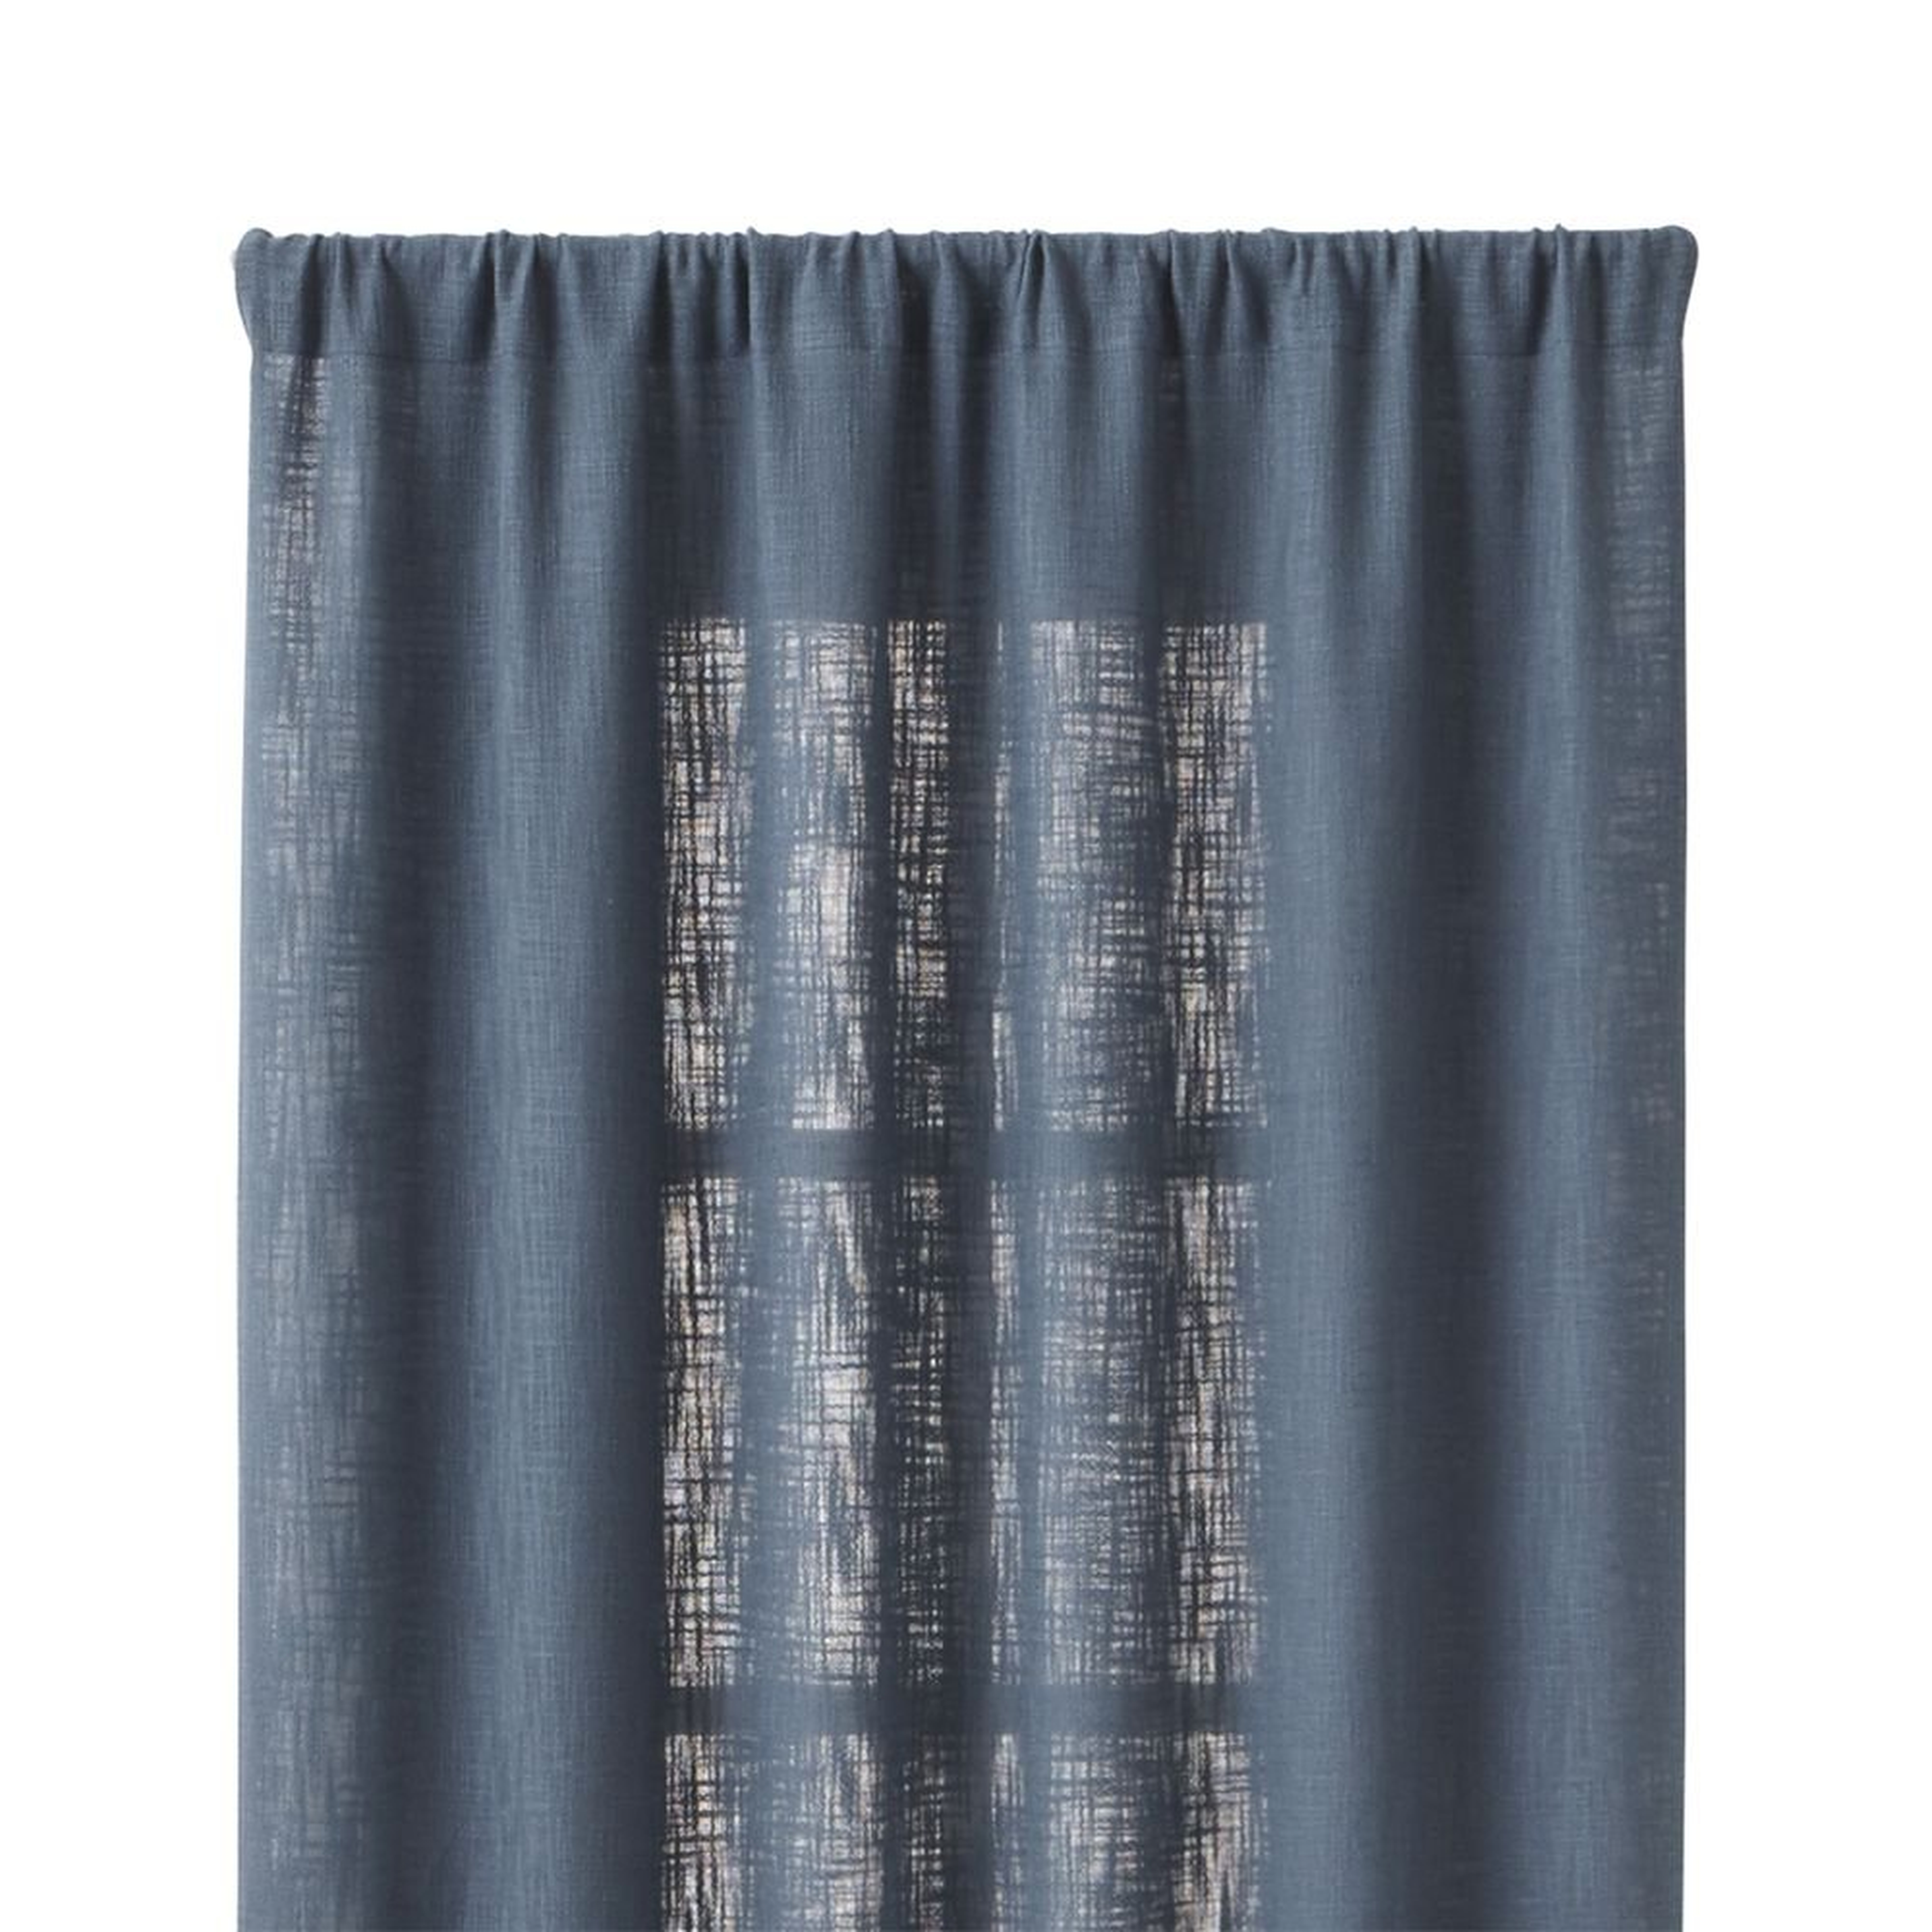 Lindstrom Blue 48"x96" Curtain Panel - Crate and Barrel